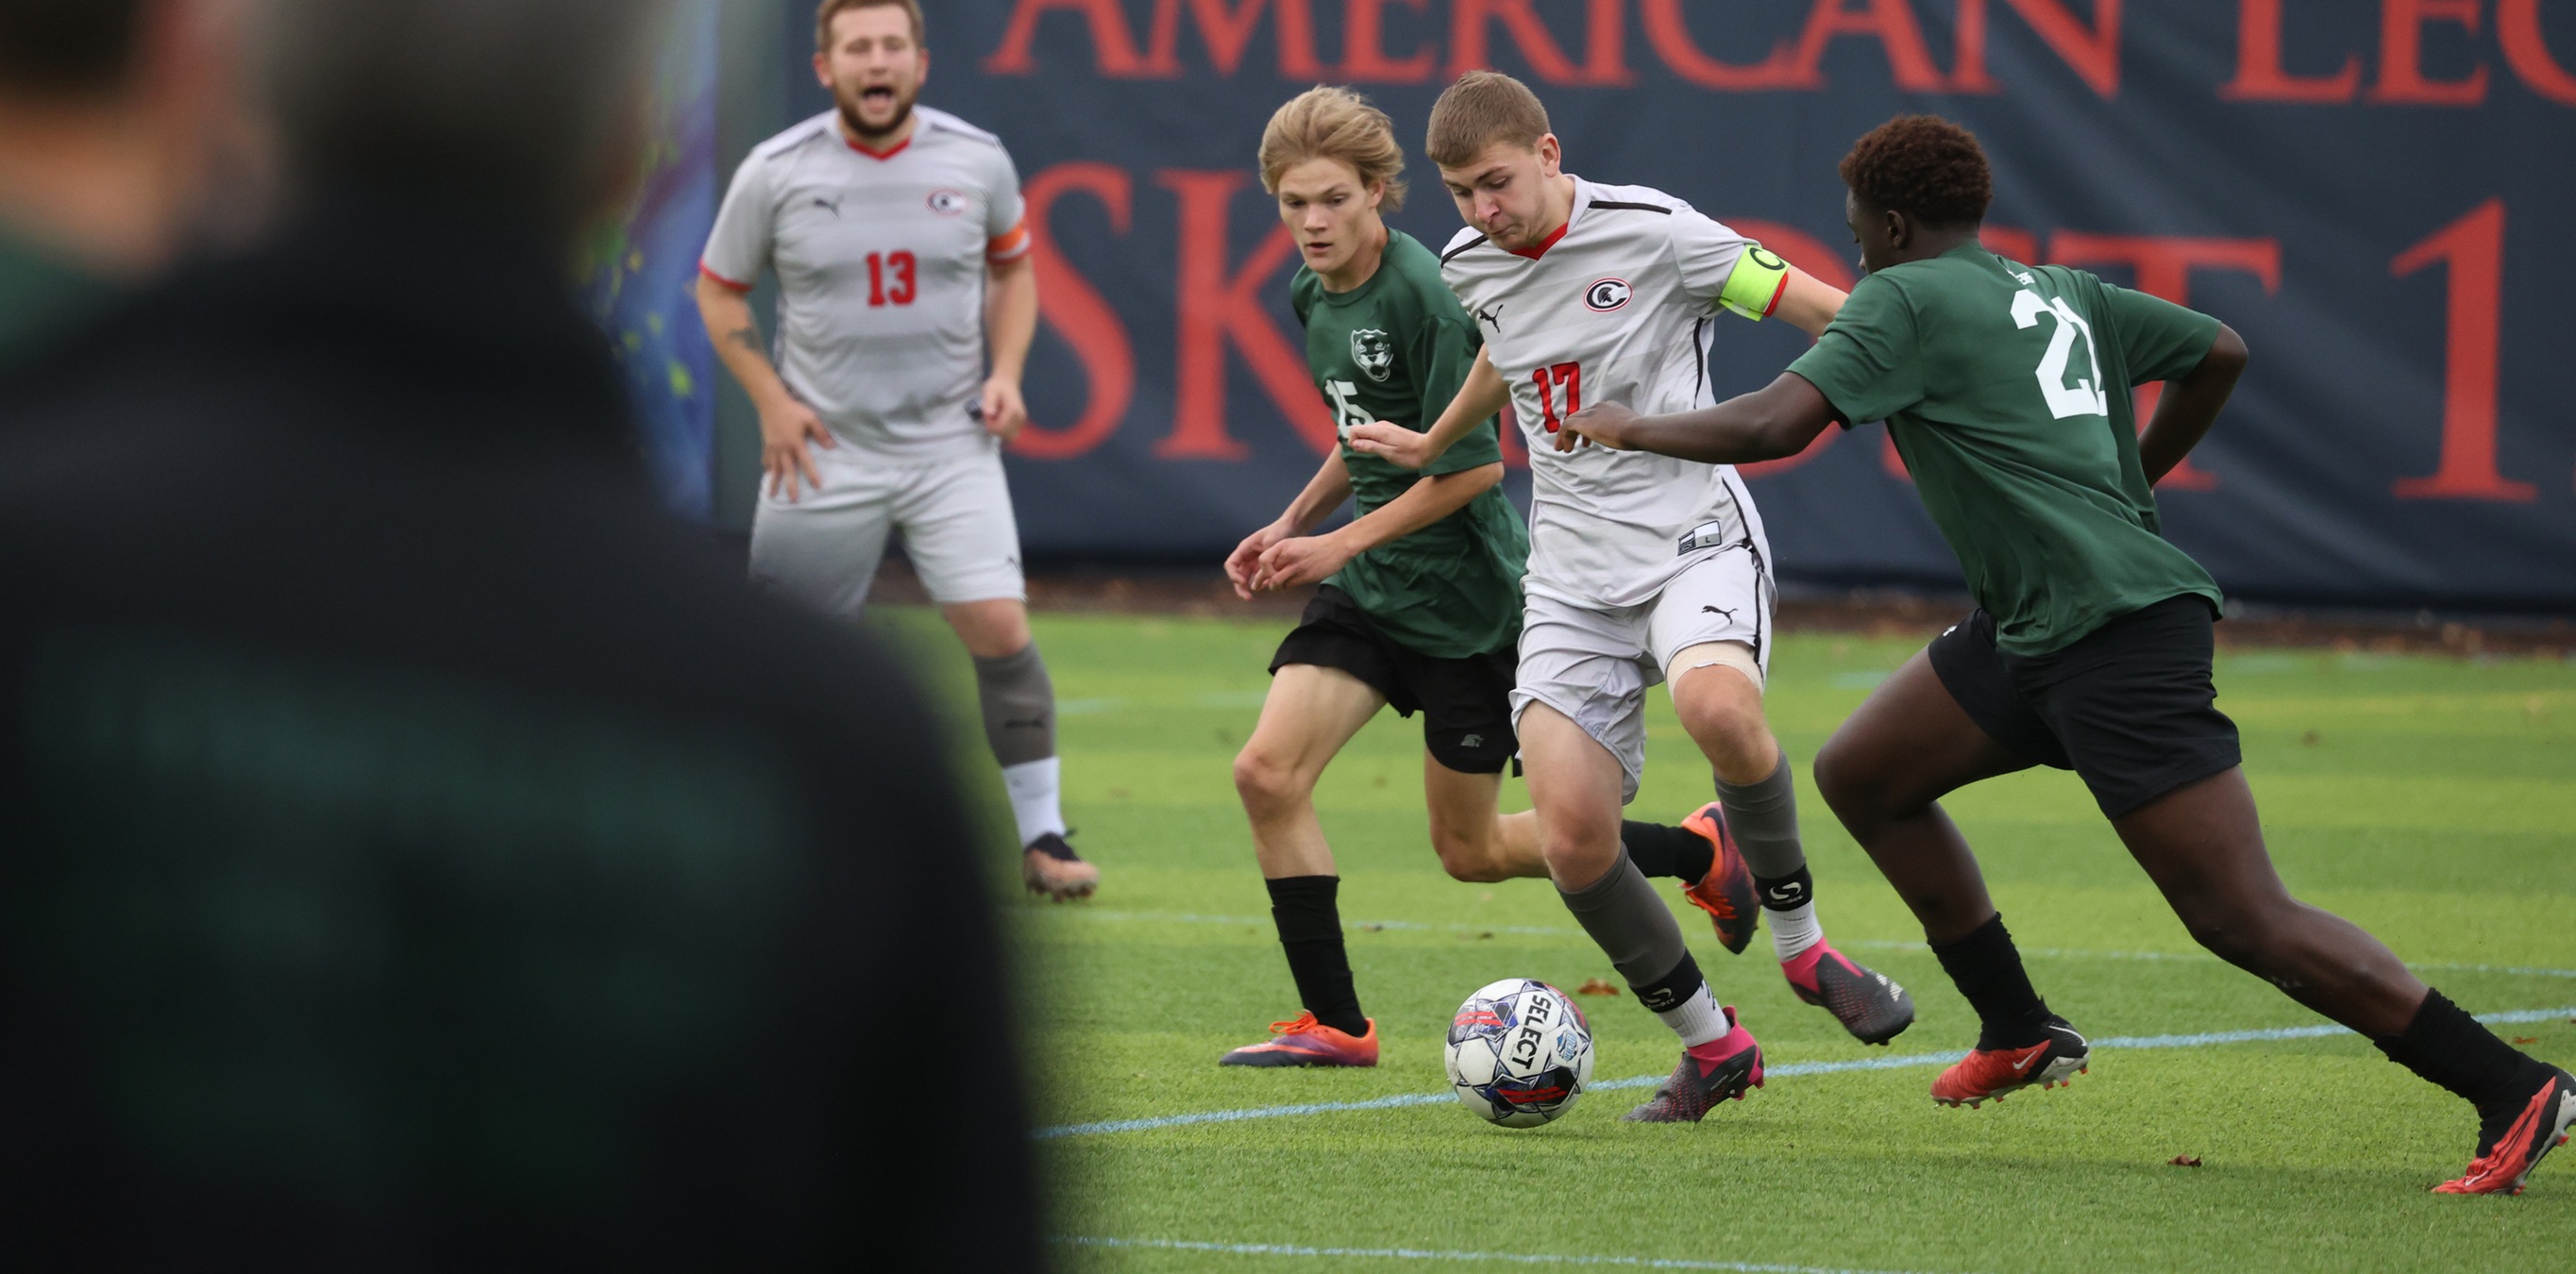 Cayuga fell 6-0 in the regional semifinal to Herkimer College on Wednesday.